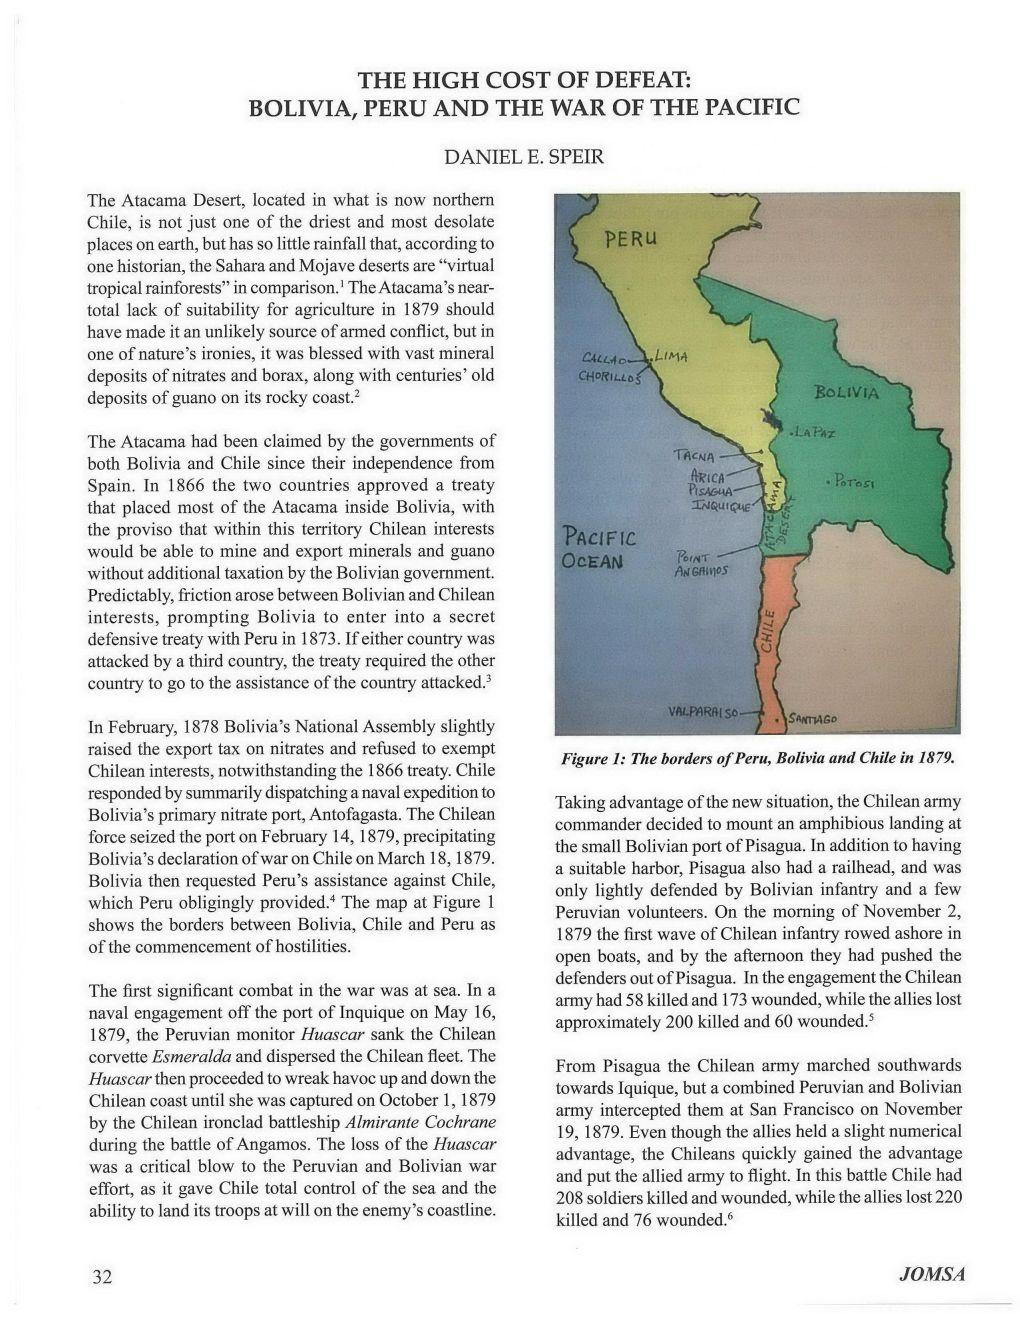 The High Cost of Defeat: Bolivia, Peru and the War of the Pacific